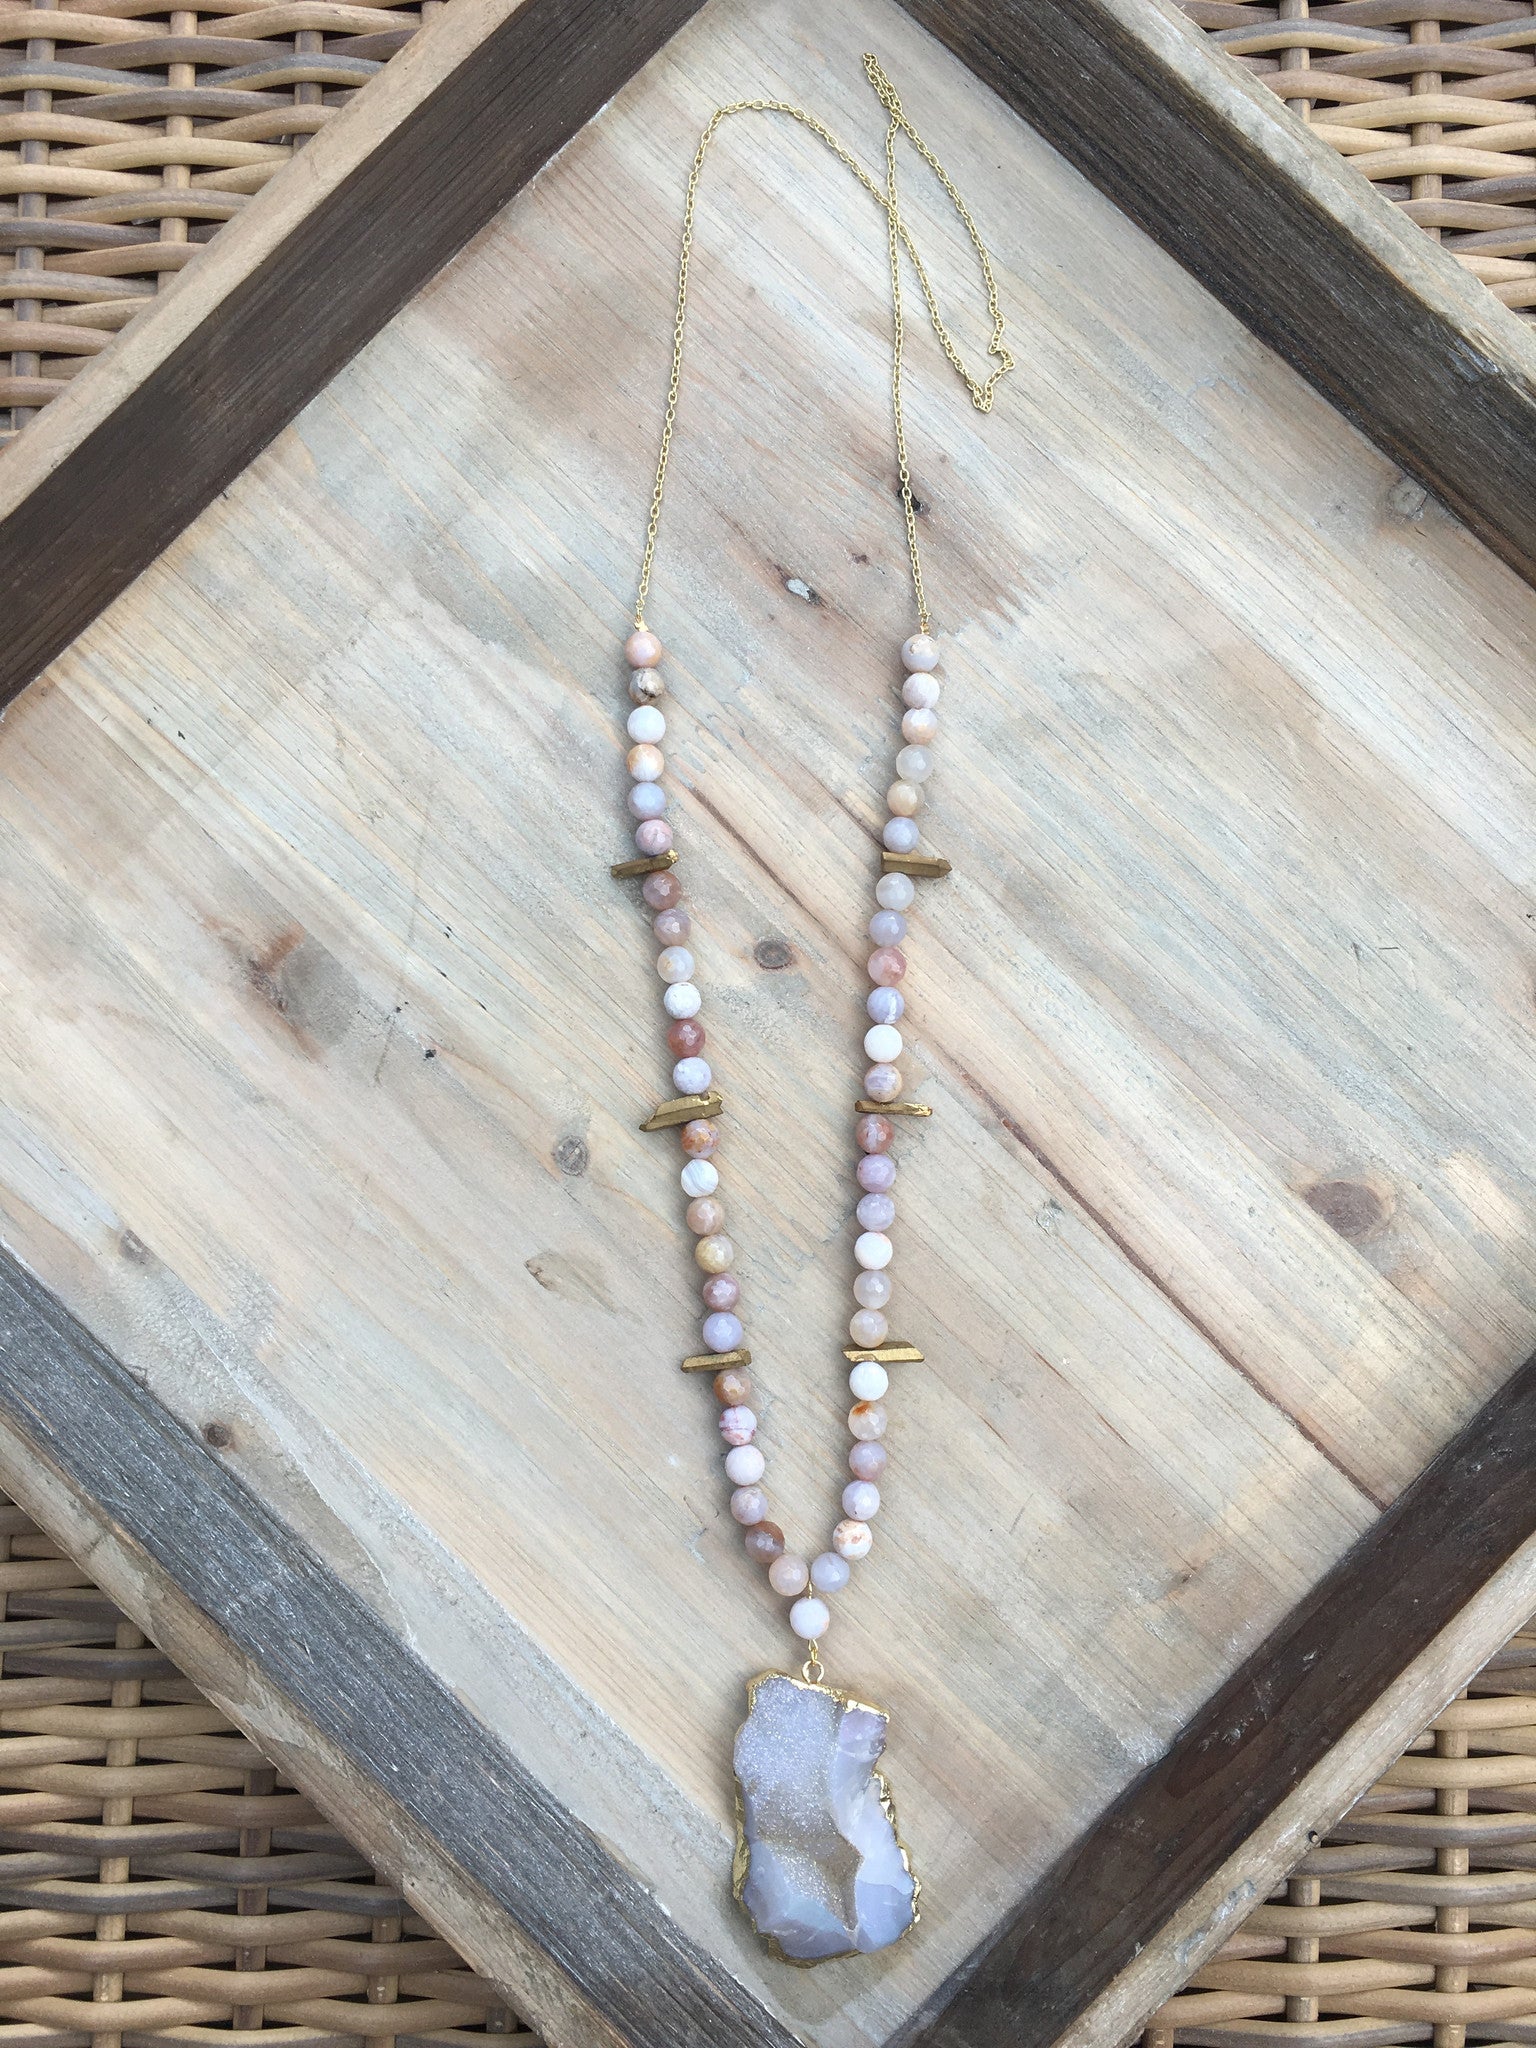 Geode Slab and Agate Necklace